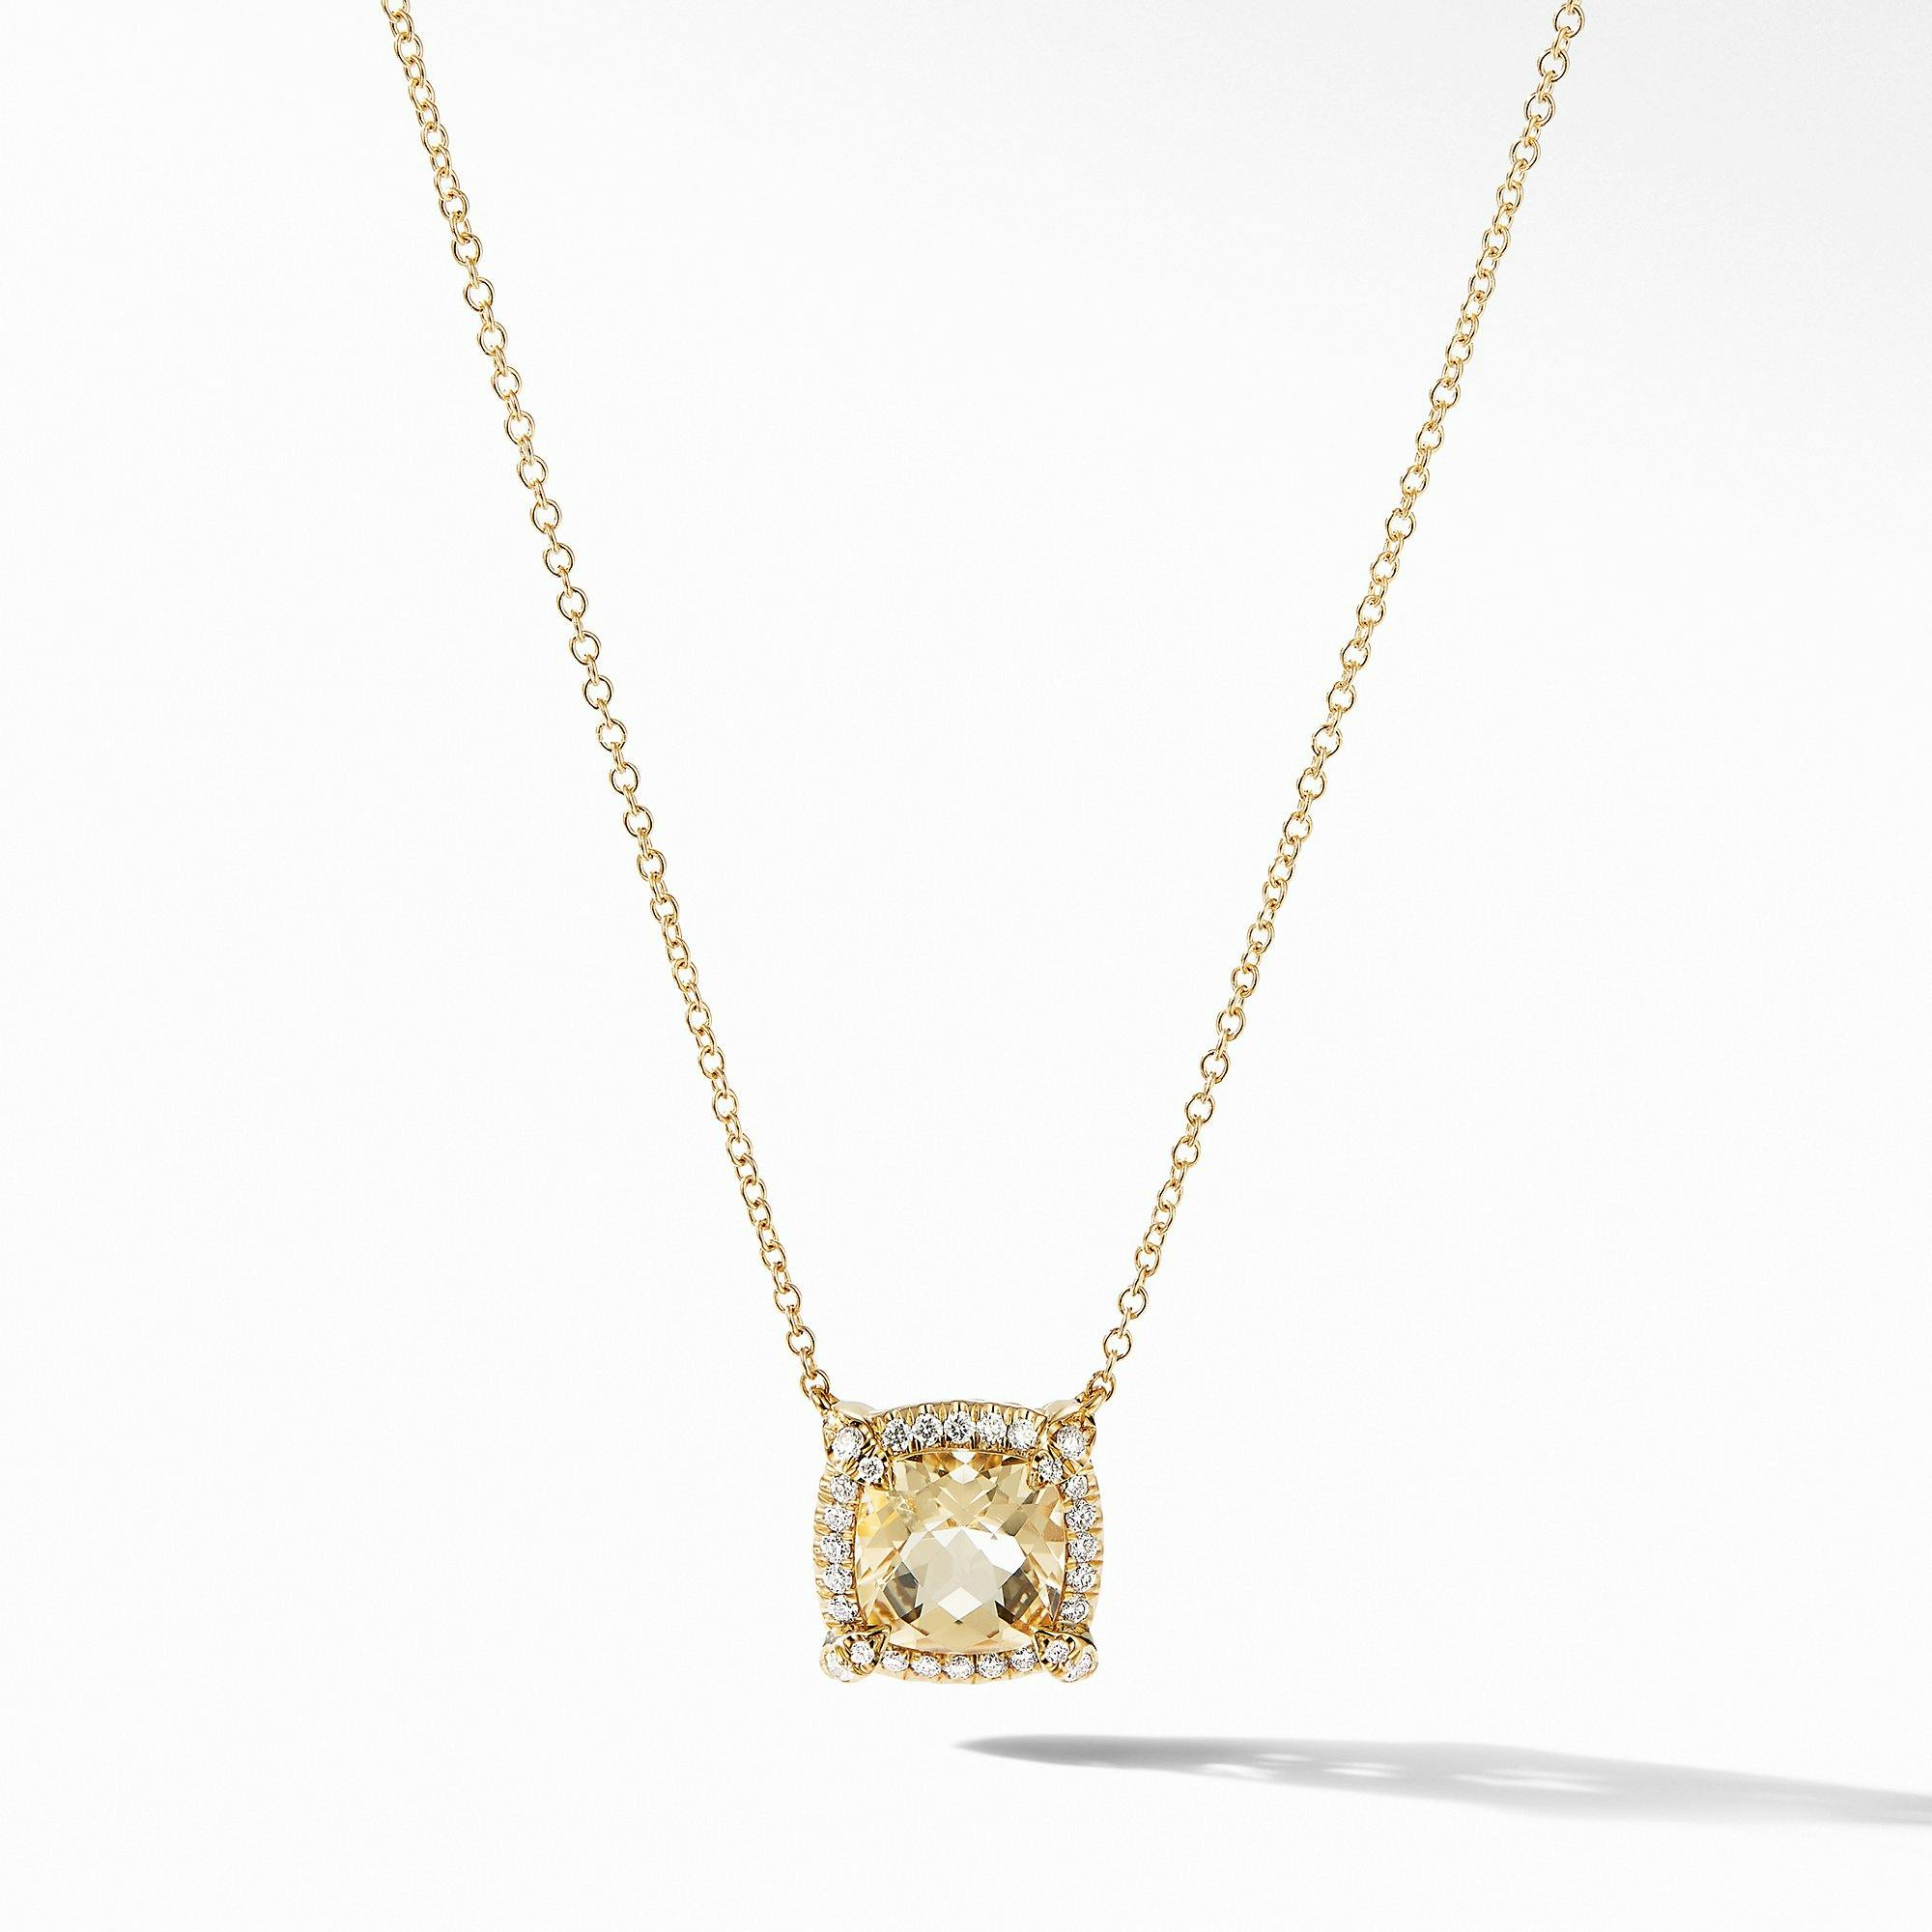 David Yurman Petite Chatelaine Pave Bezel Pendant Necklace in 18k Yellow Gold with Champagne Citrine and Diamond